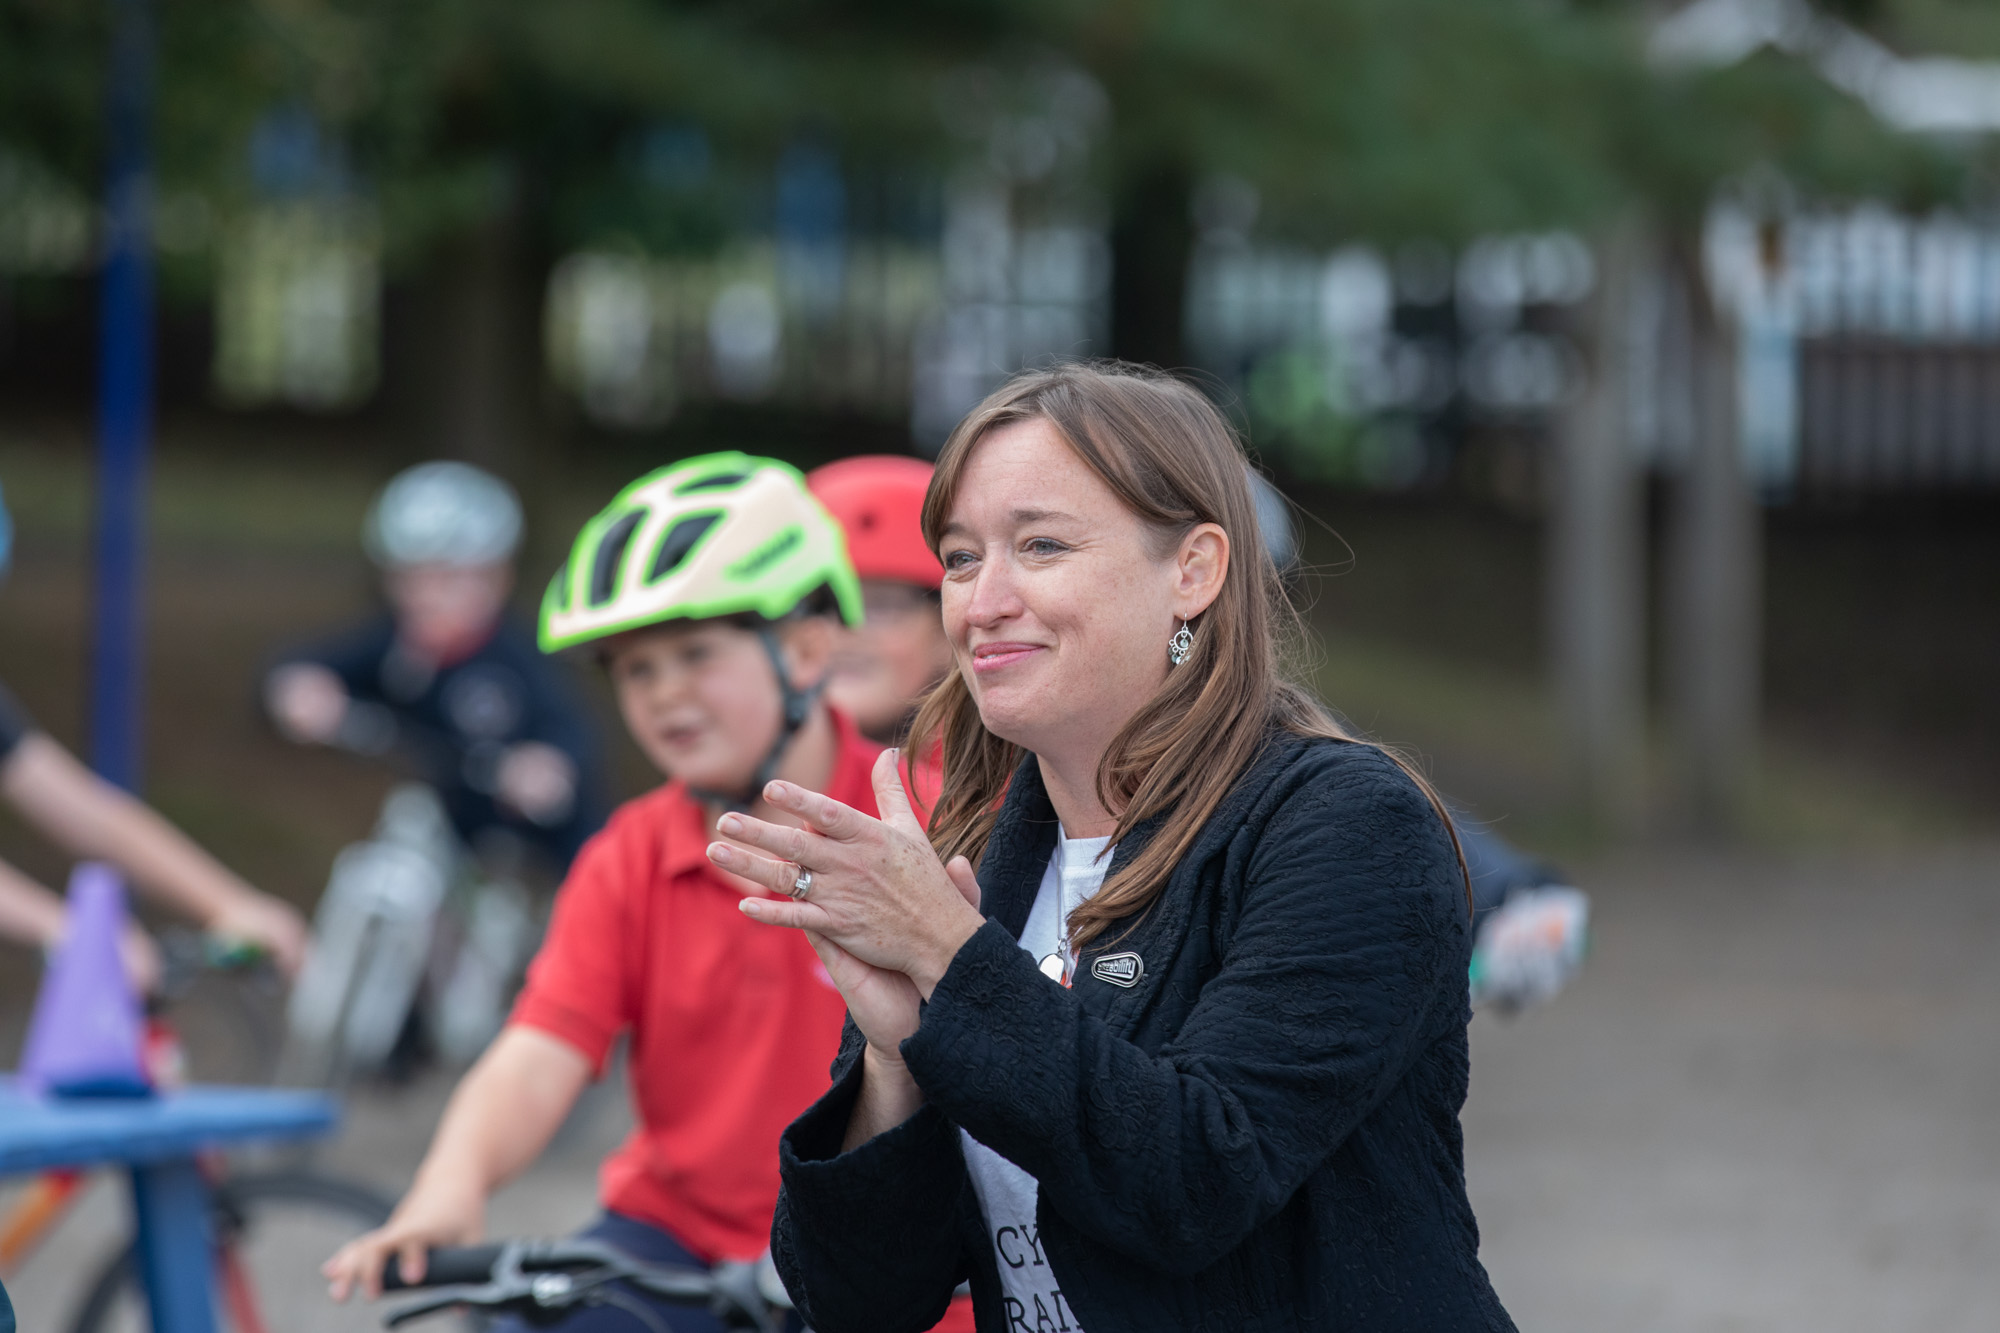 Bikeability Chief Executive Emily Cherry claps on a playground during a Bikeability session